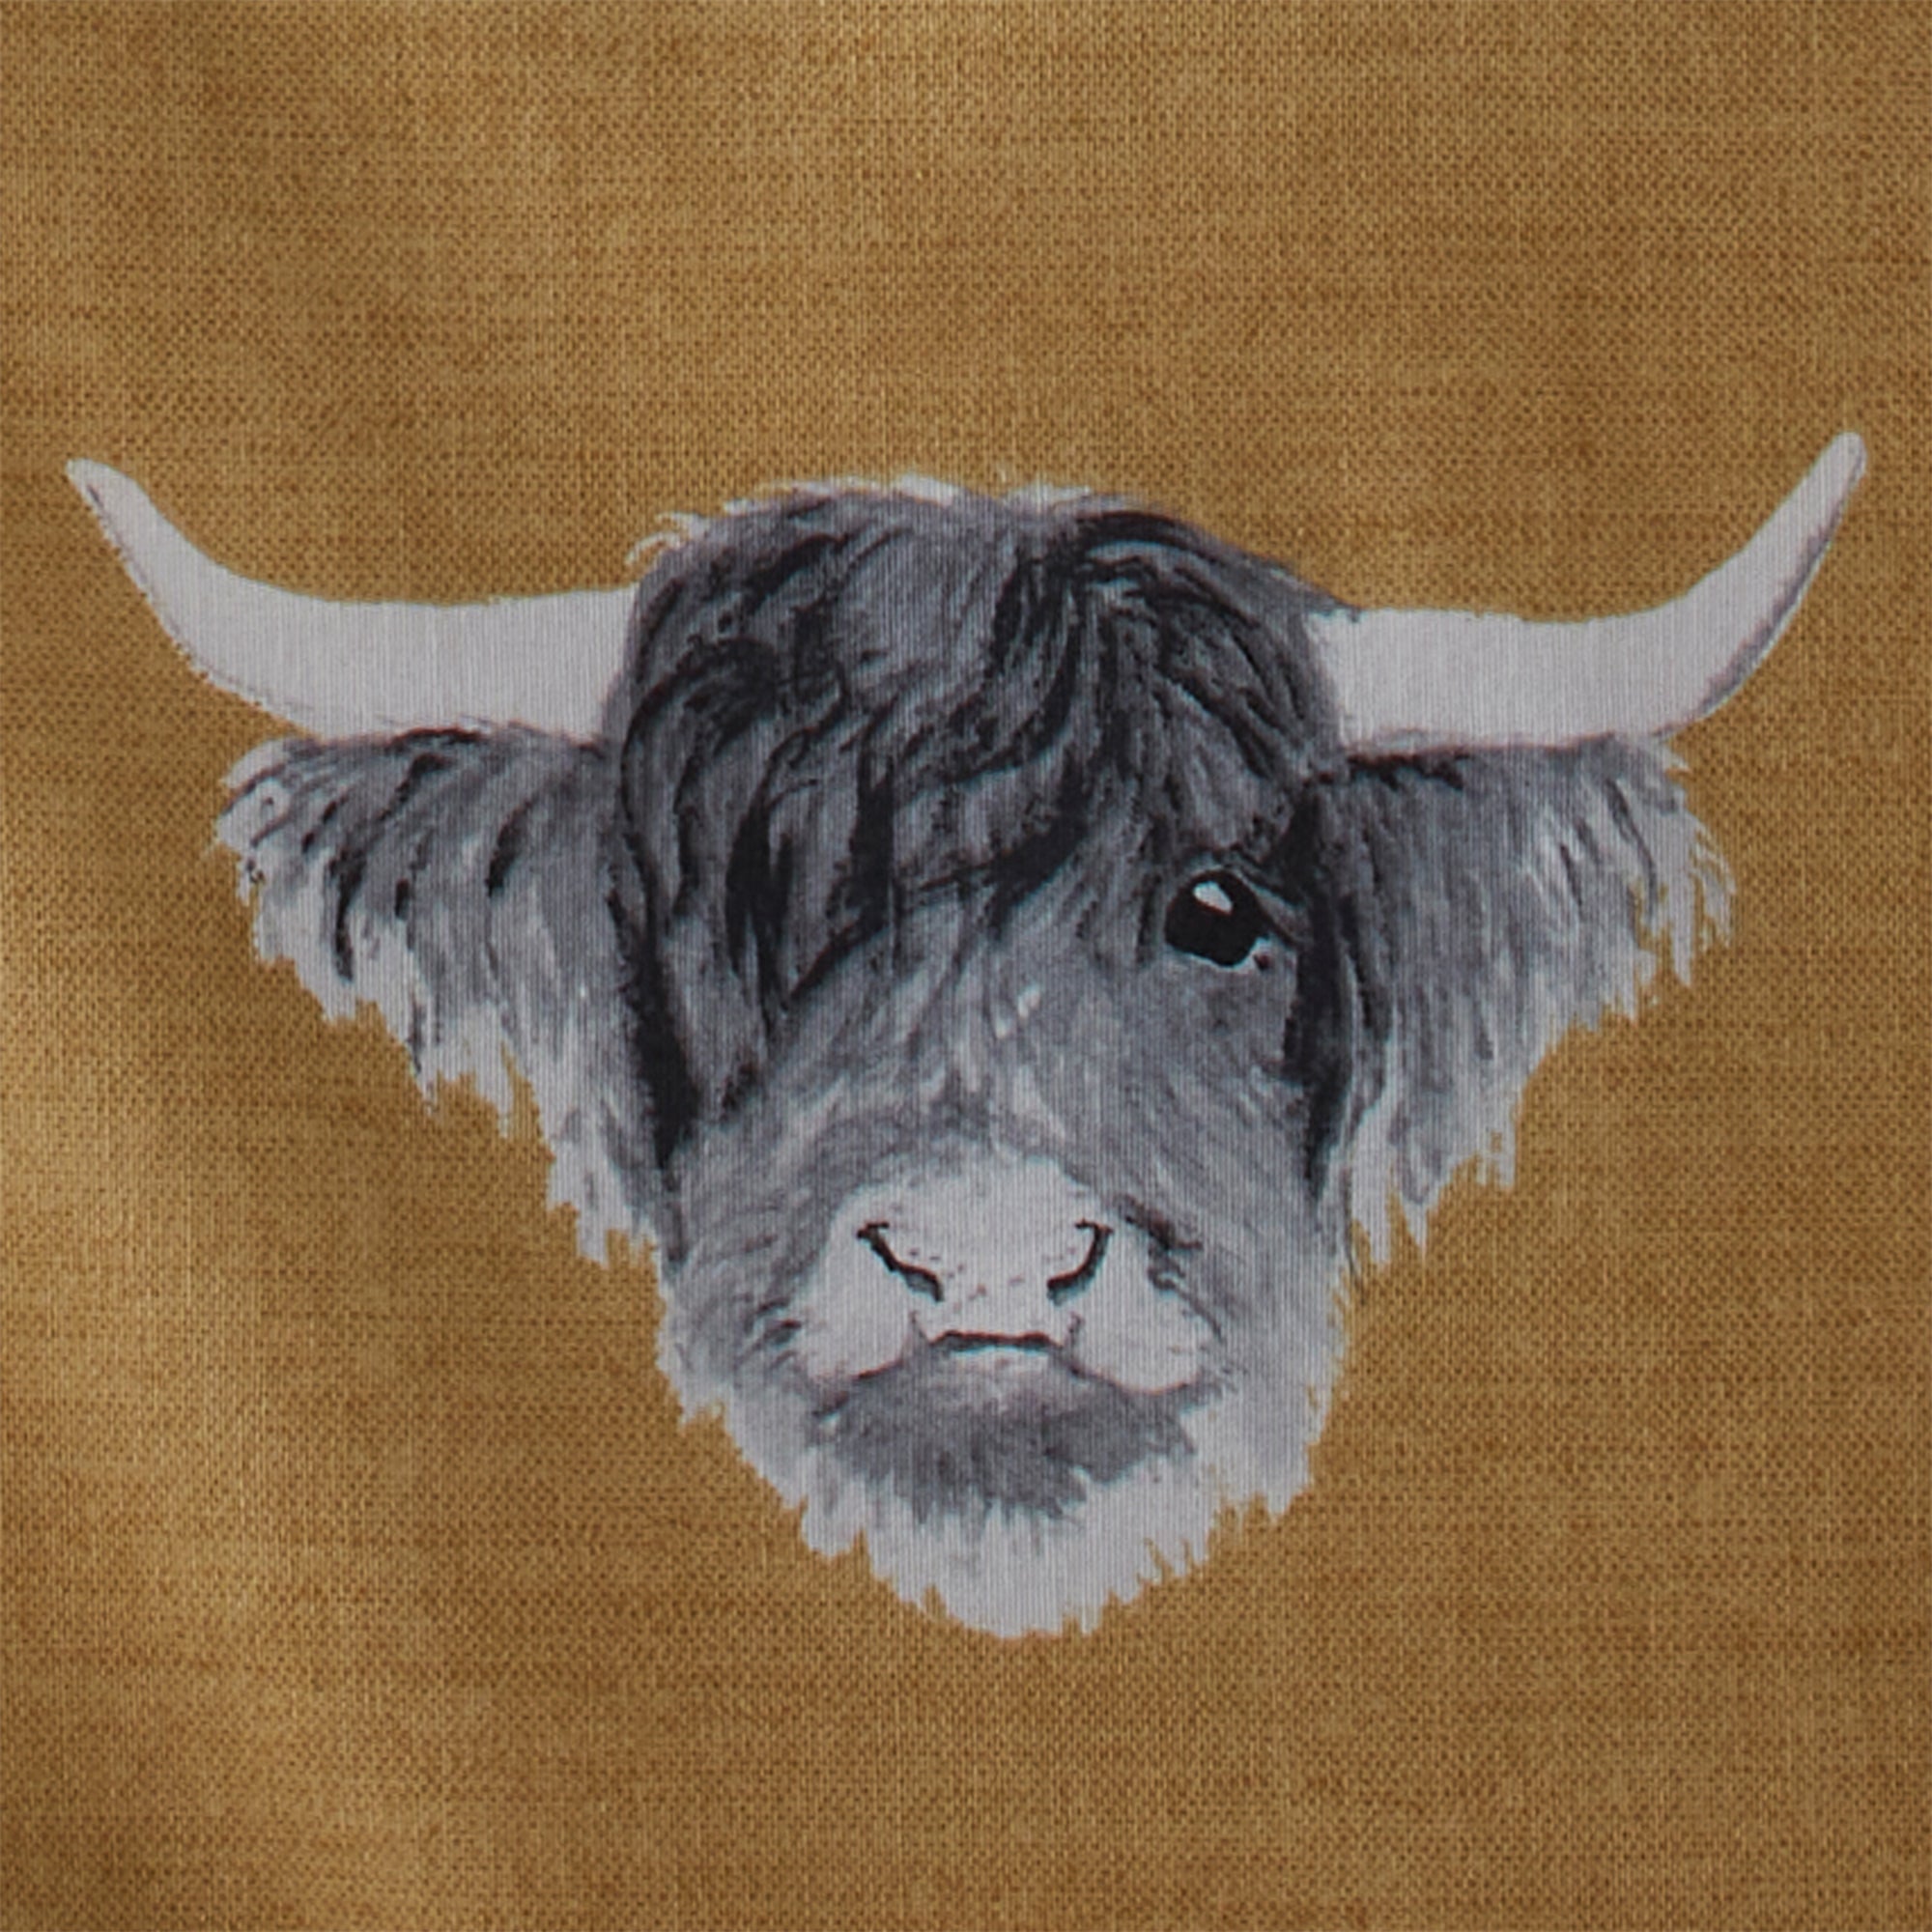 Duvet Cover Set Highland Cow by Fusion Snug in Ochre